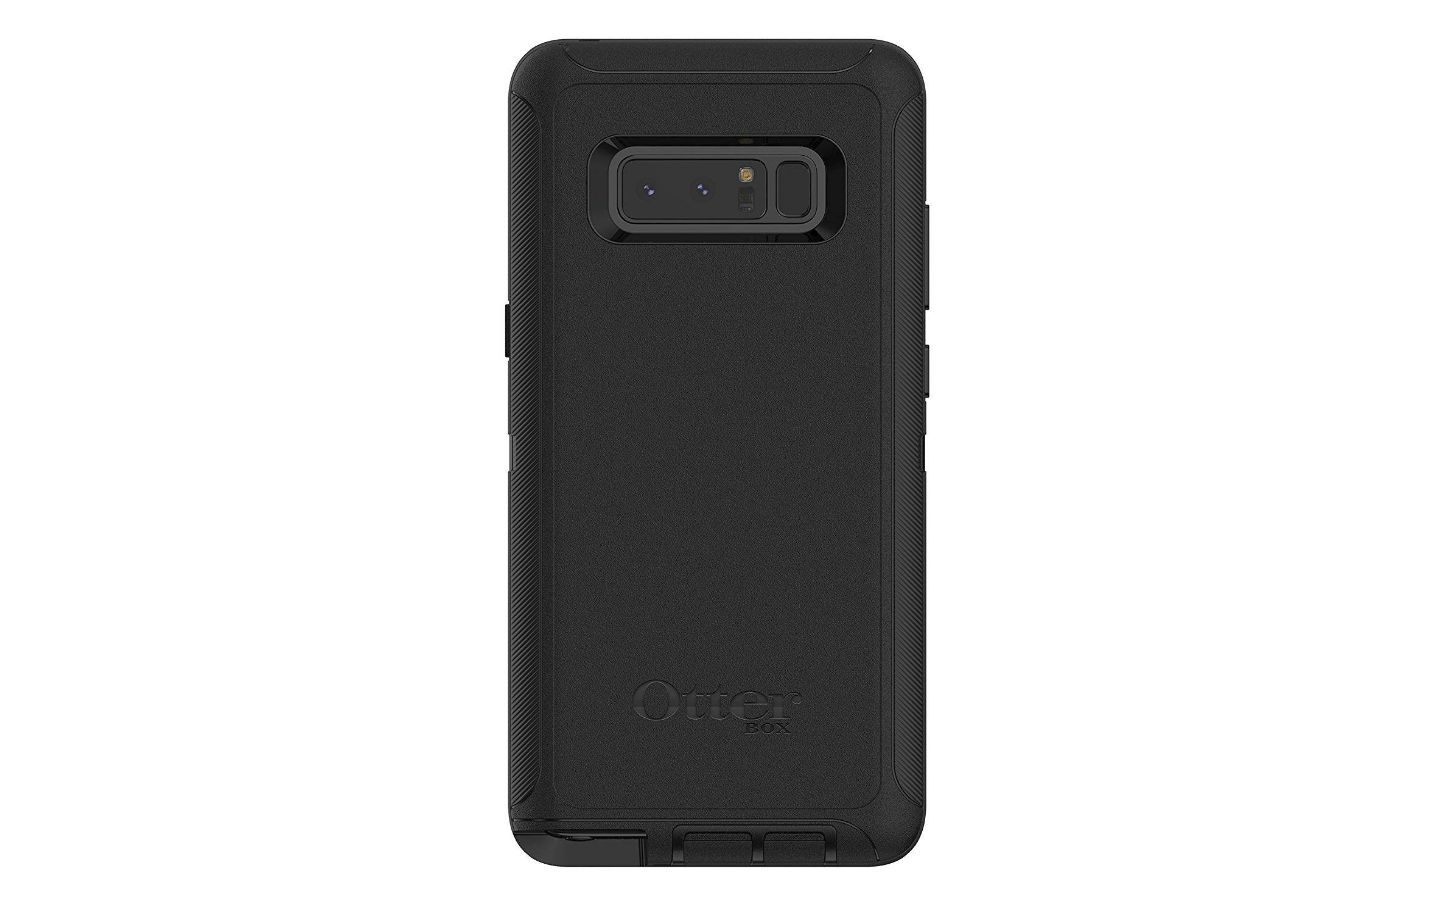 Galaxy Note 8 cases - Otterbox